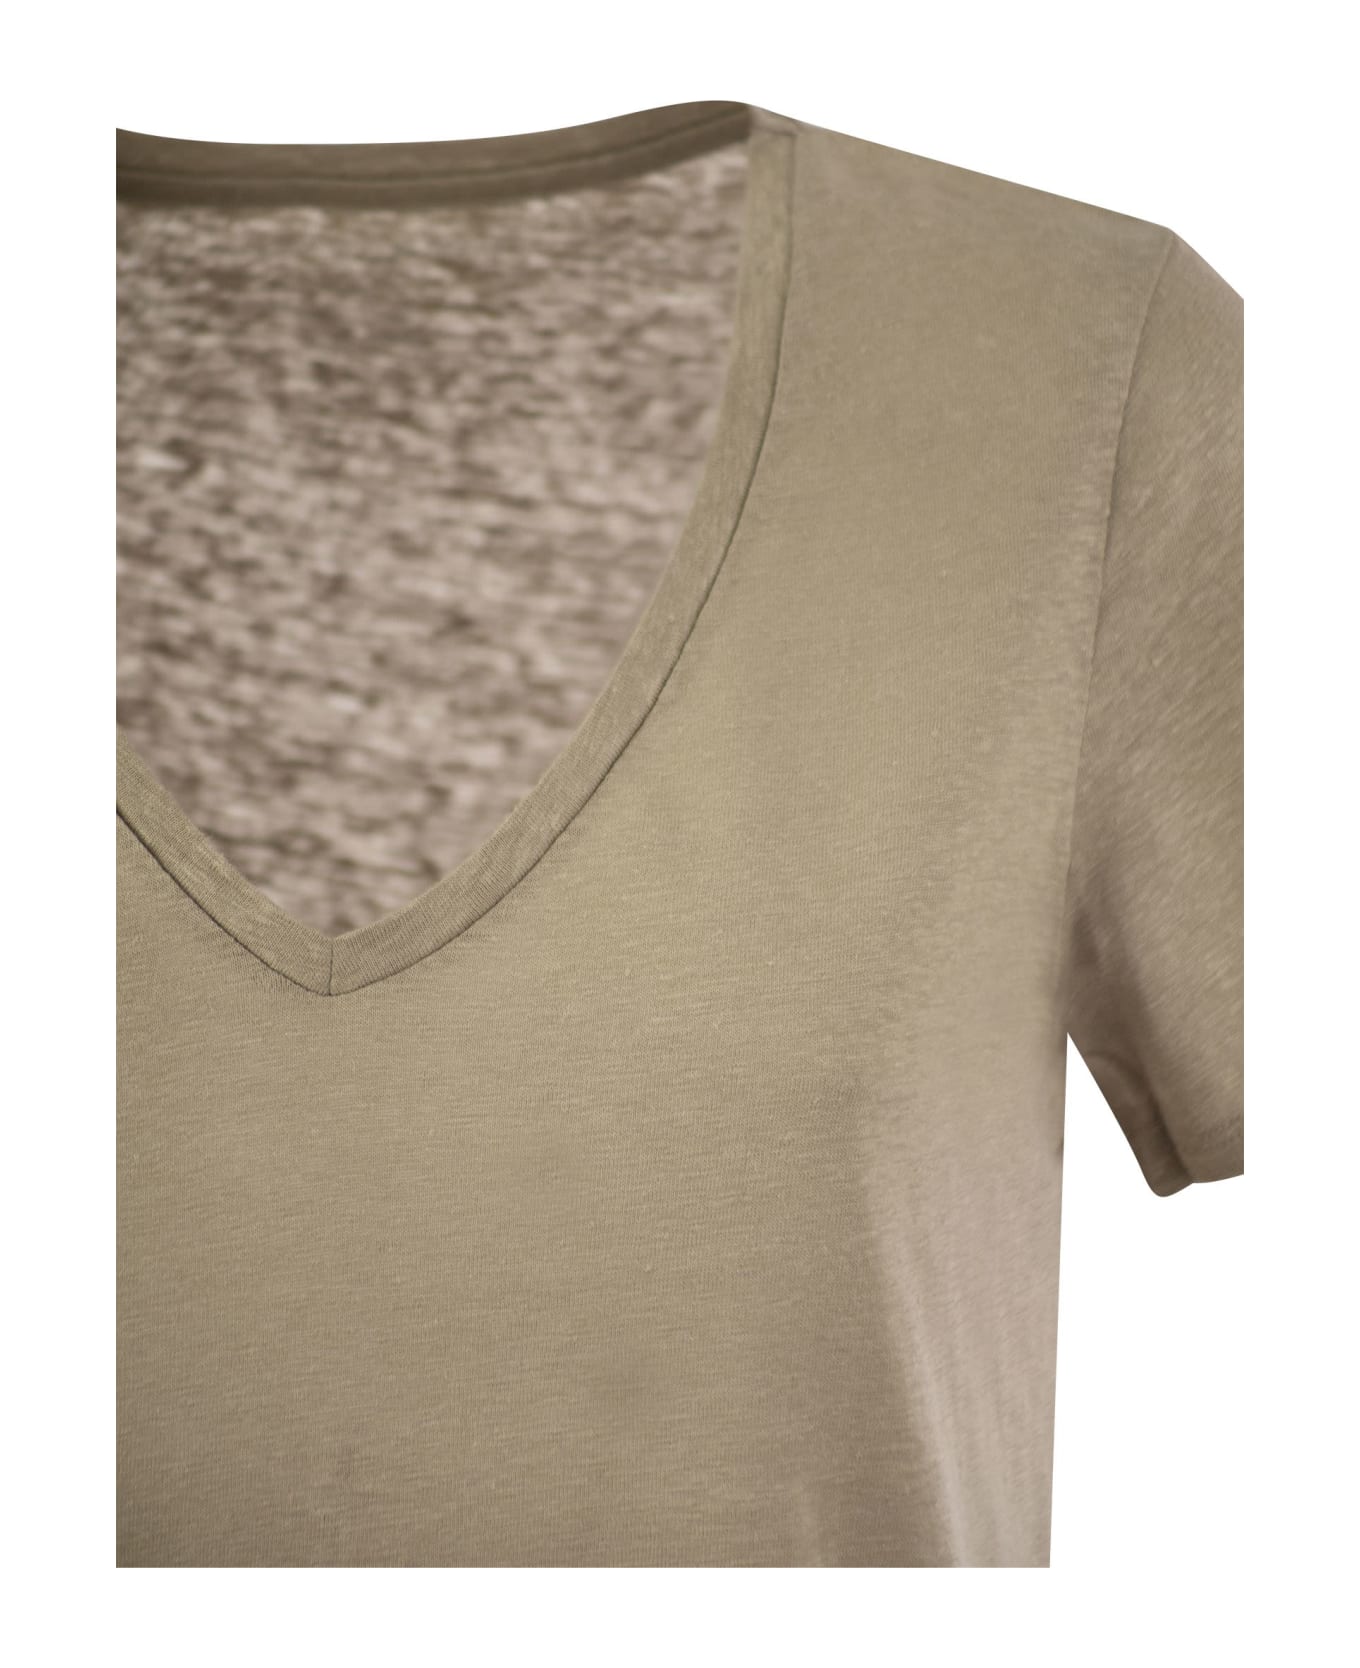 Majestic Filatures Linen V-neck T-shirt With Short Sleeves - Sand Tシャツ